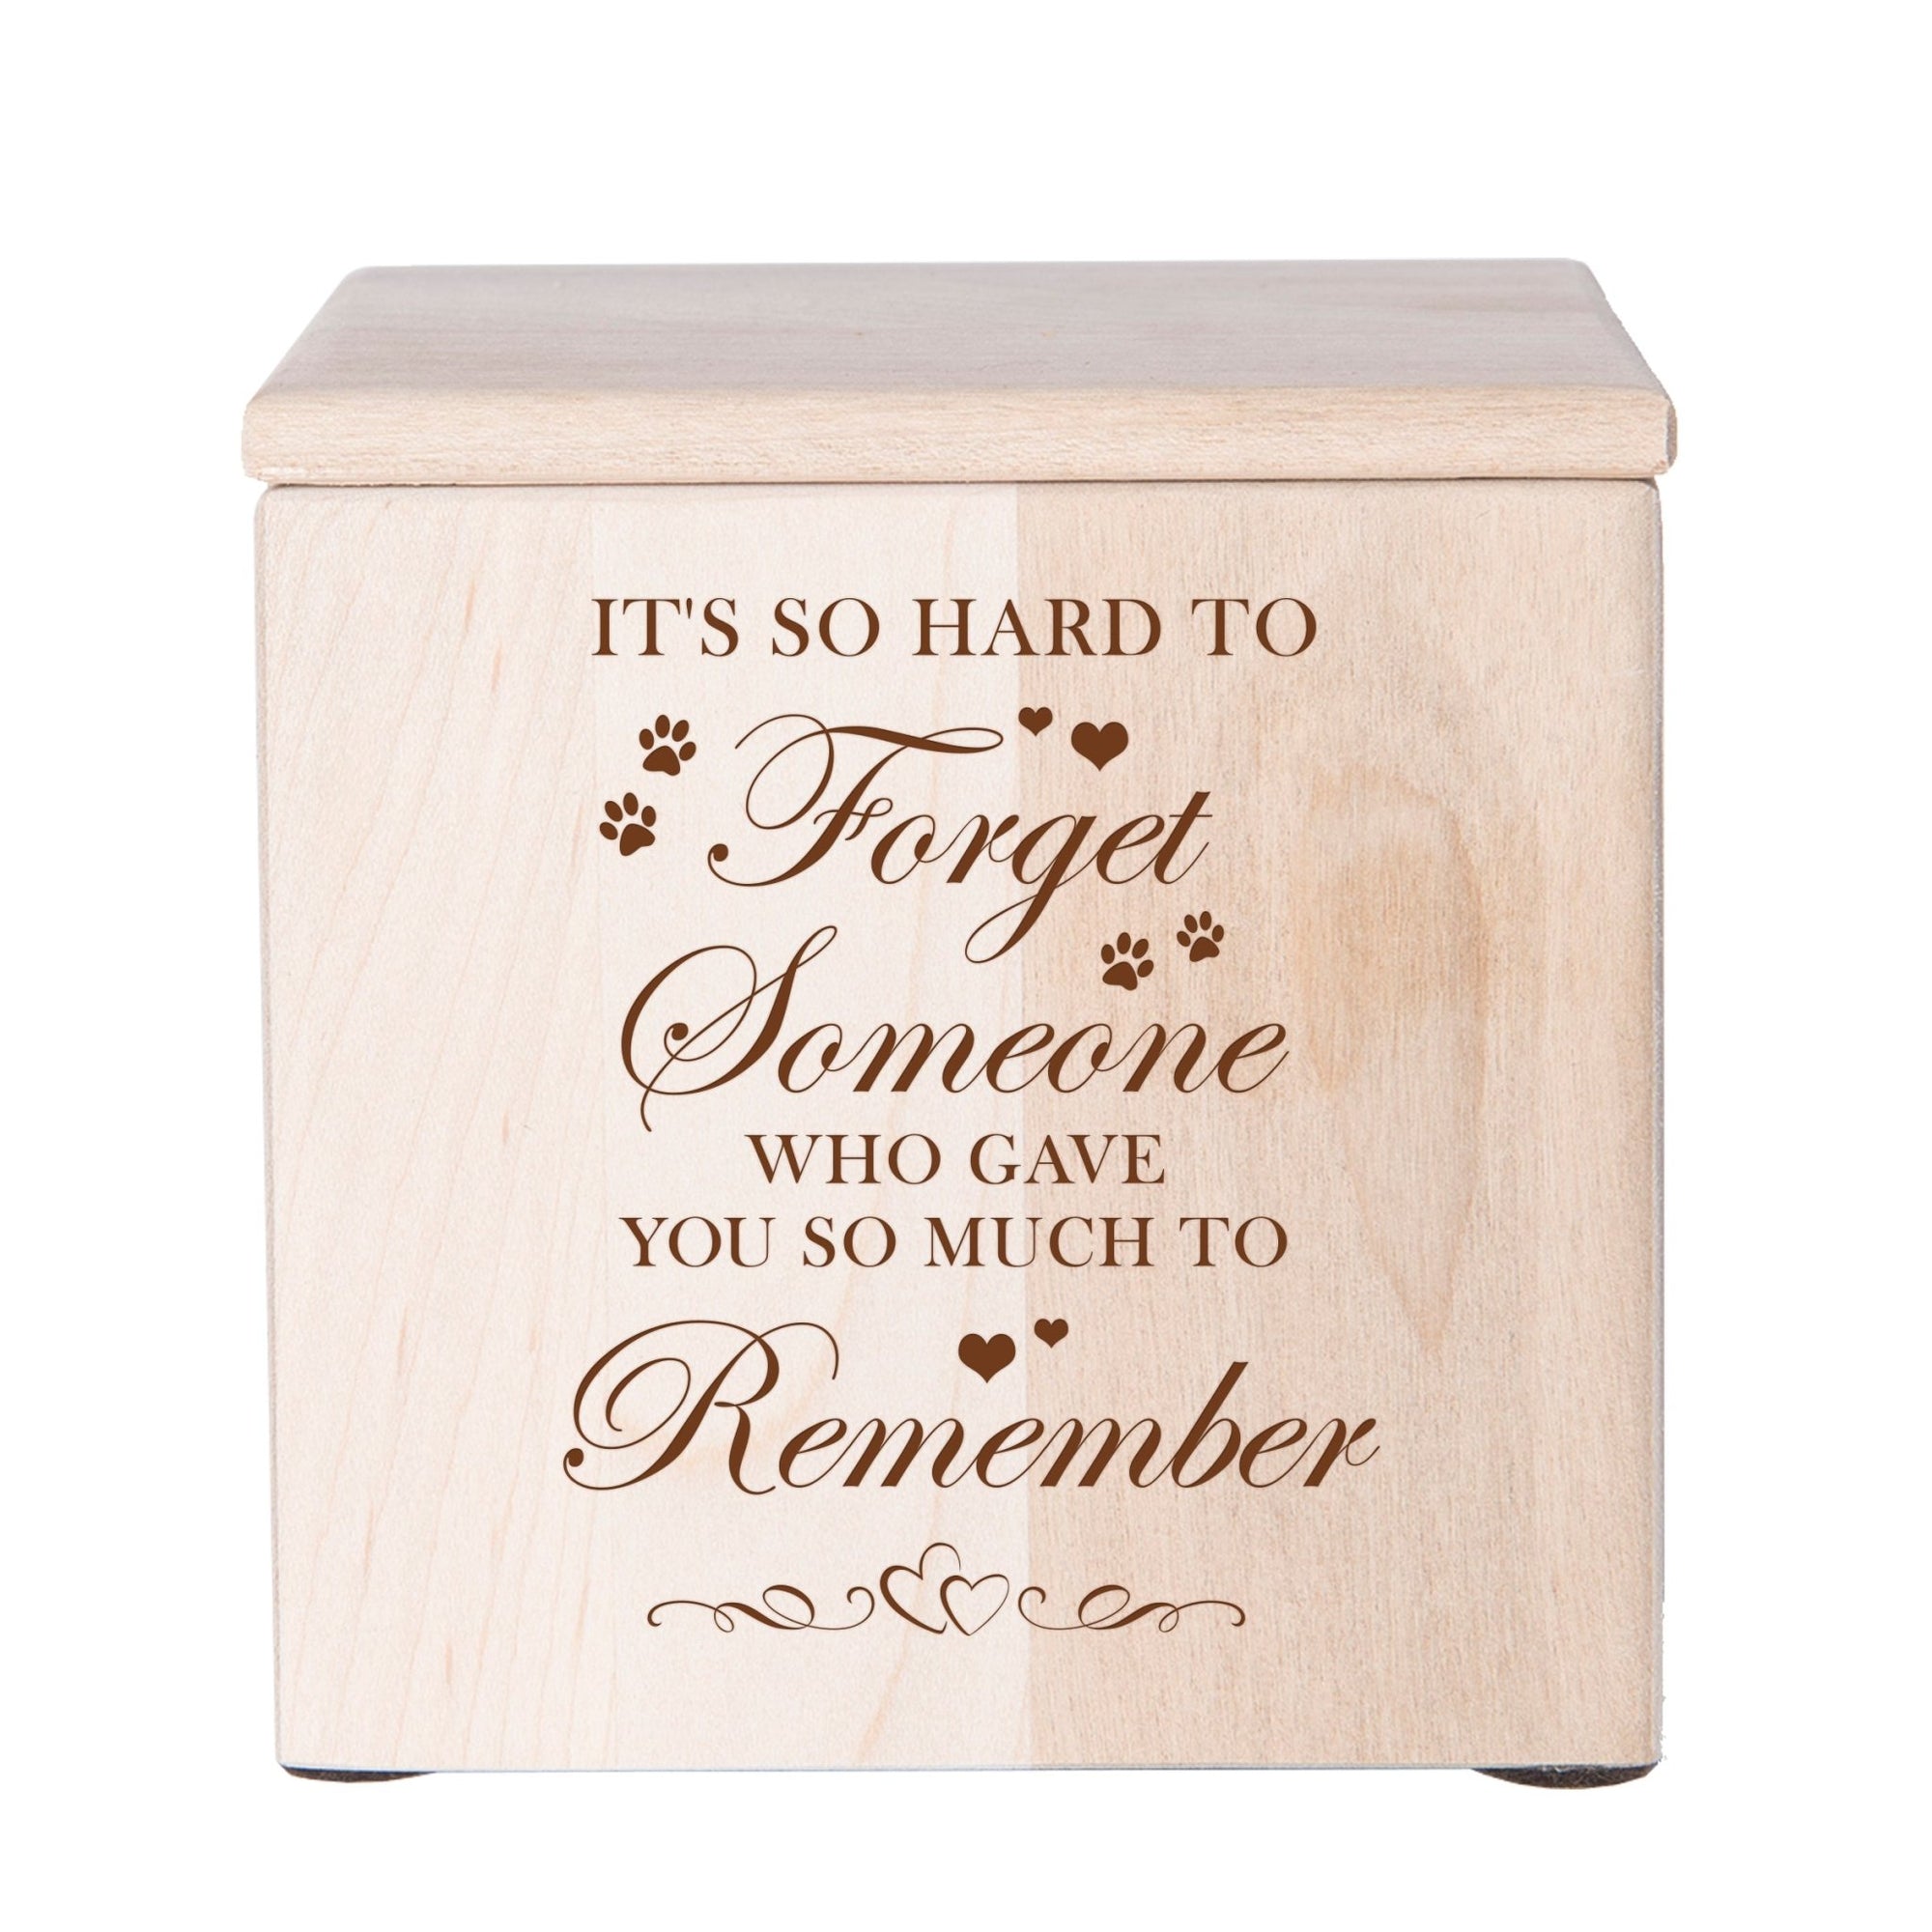 Pet Memorial Keepsake Cremation Urn Box for Dog or Cat - It's So Hard To Forget - LifeSong Milestones